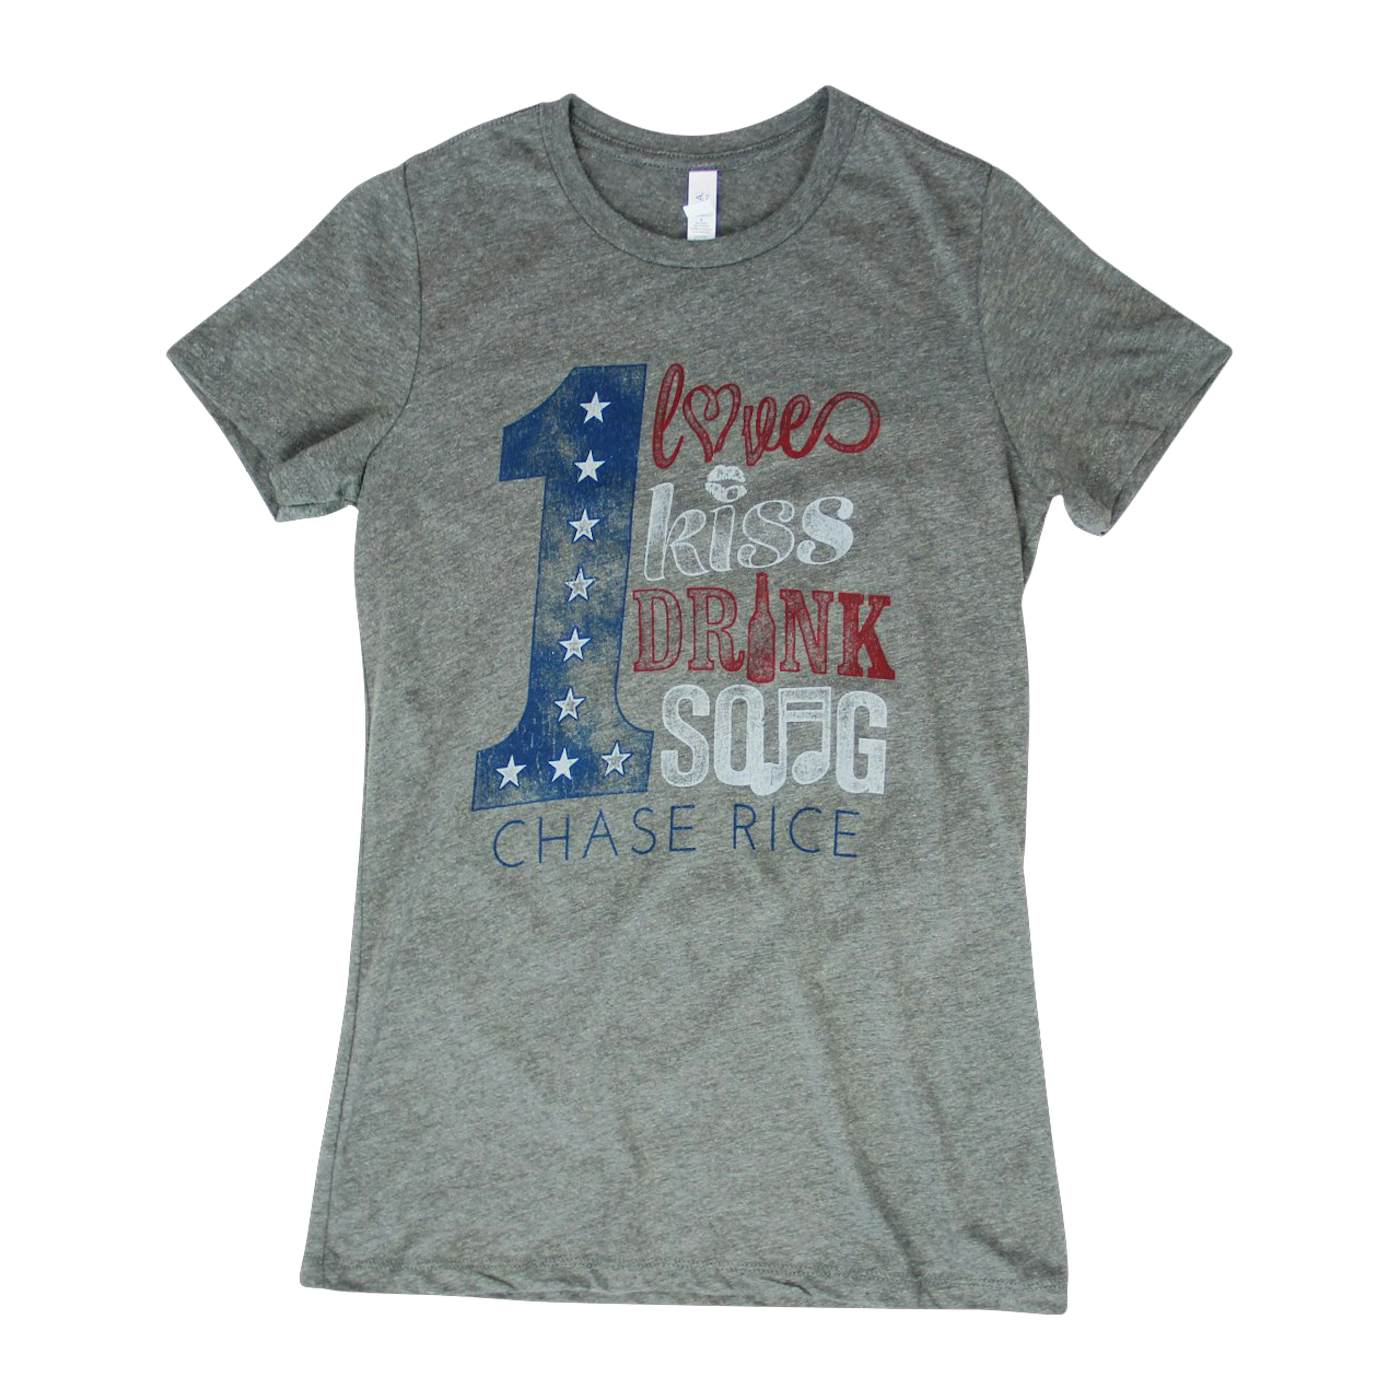 Chase Rice Ladies One Love, One Drank, One Song Tee